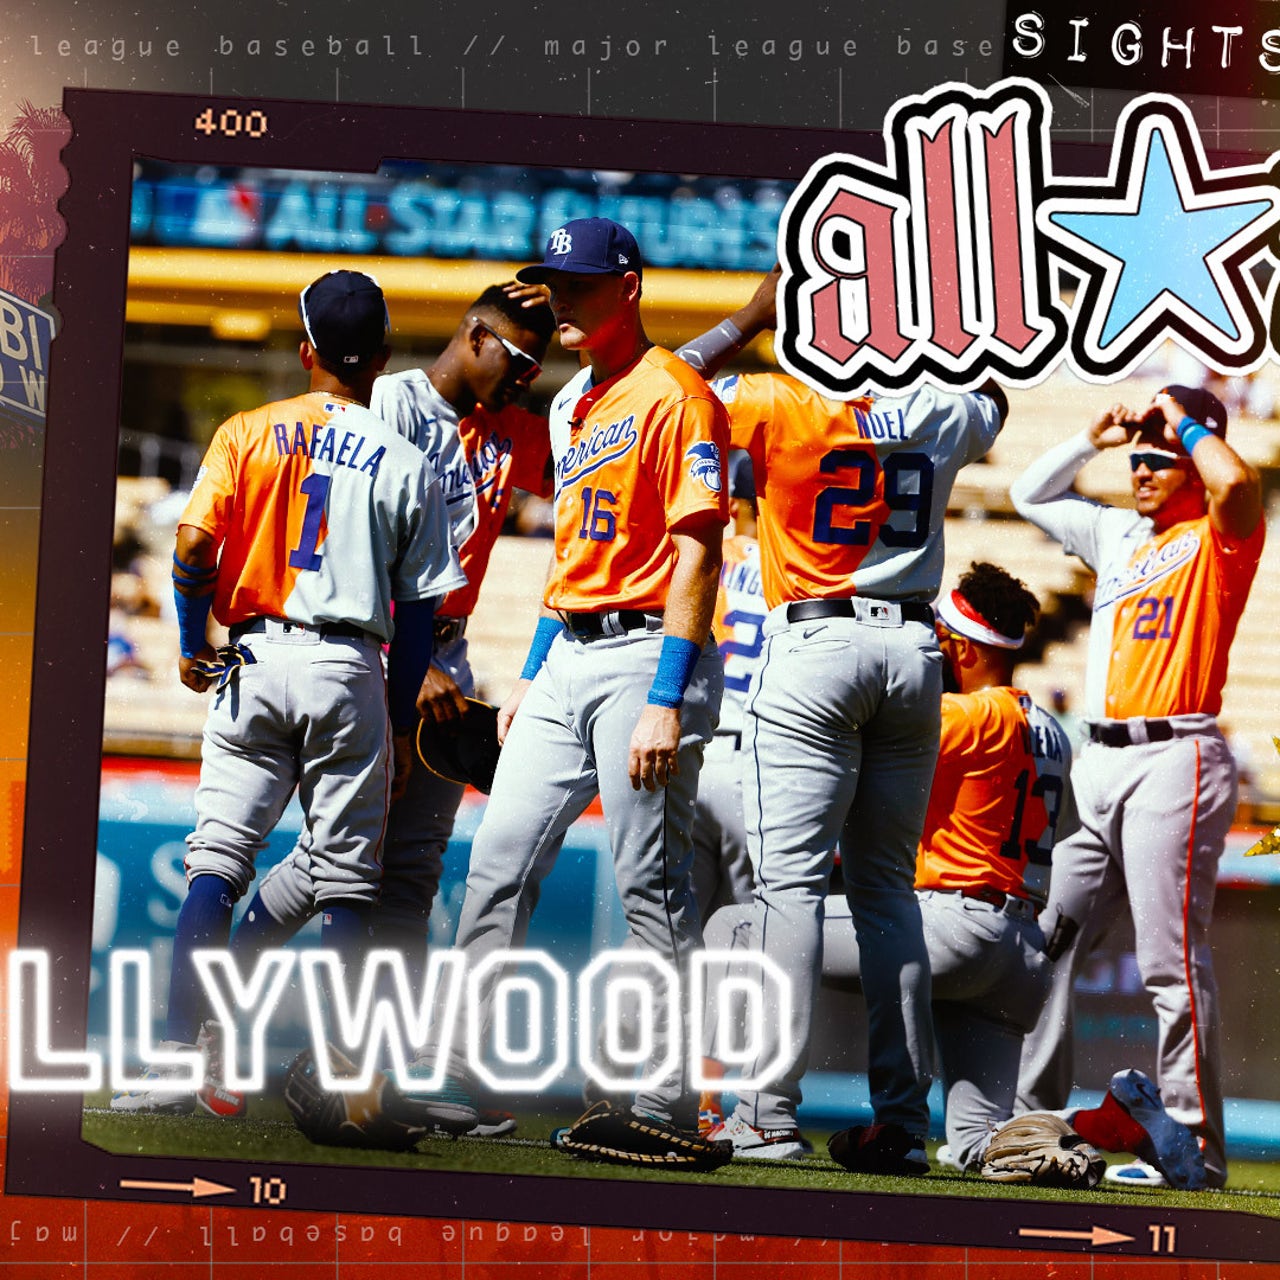 Attend the 2022 MLB All-Star Game